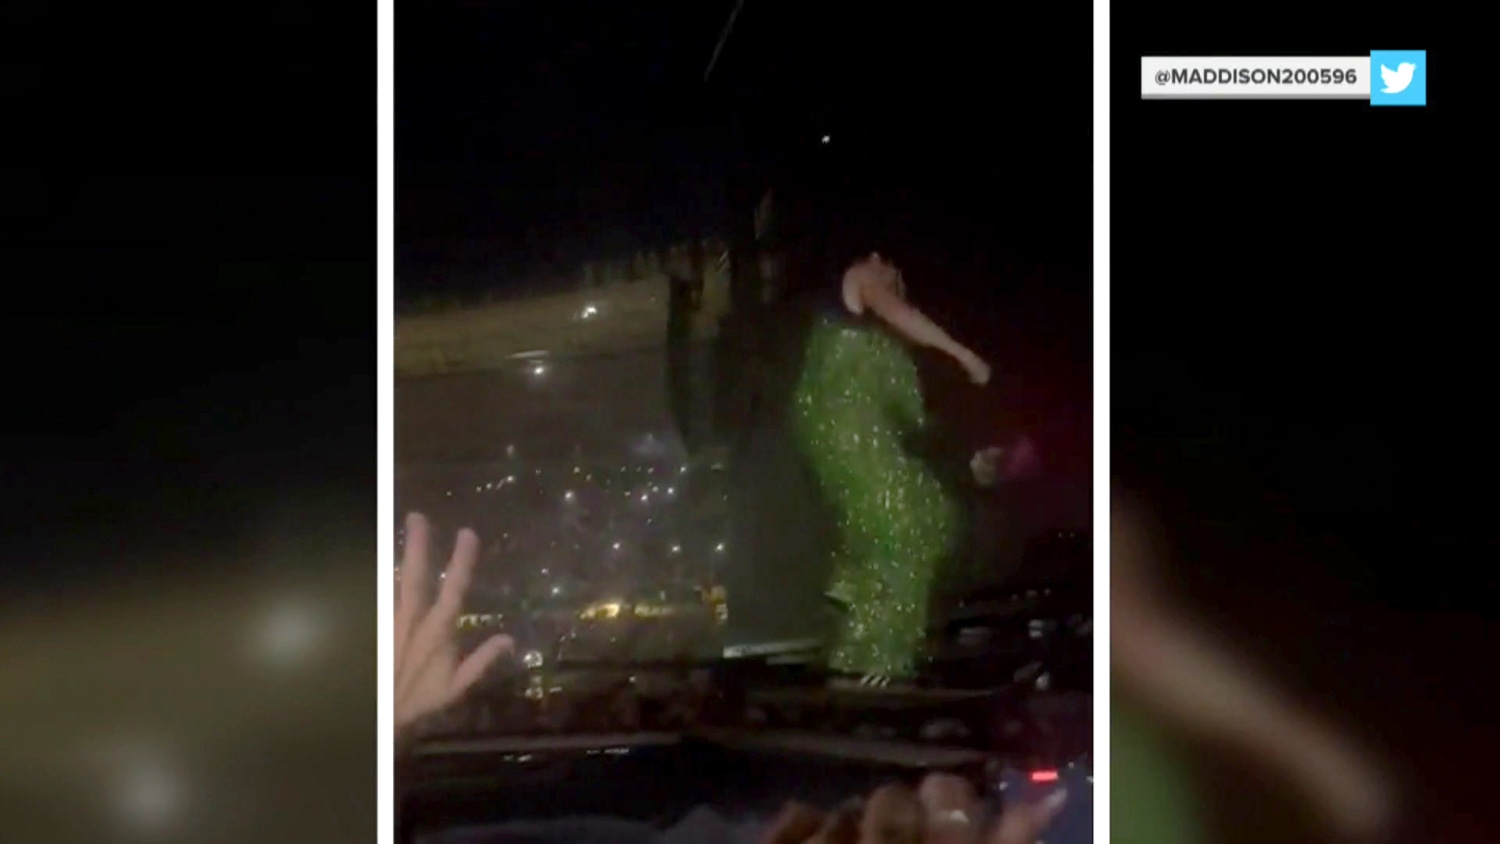 Cardi B throws mic at concertgoer who threw drink at her onstage - ABC News